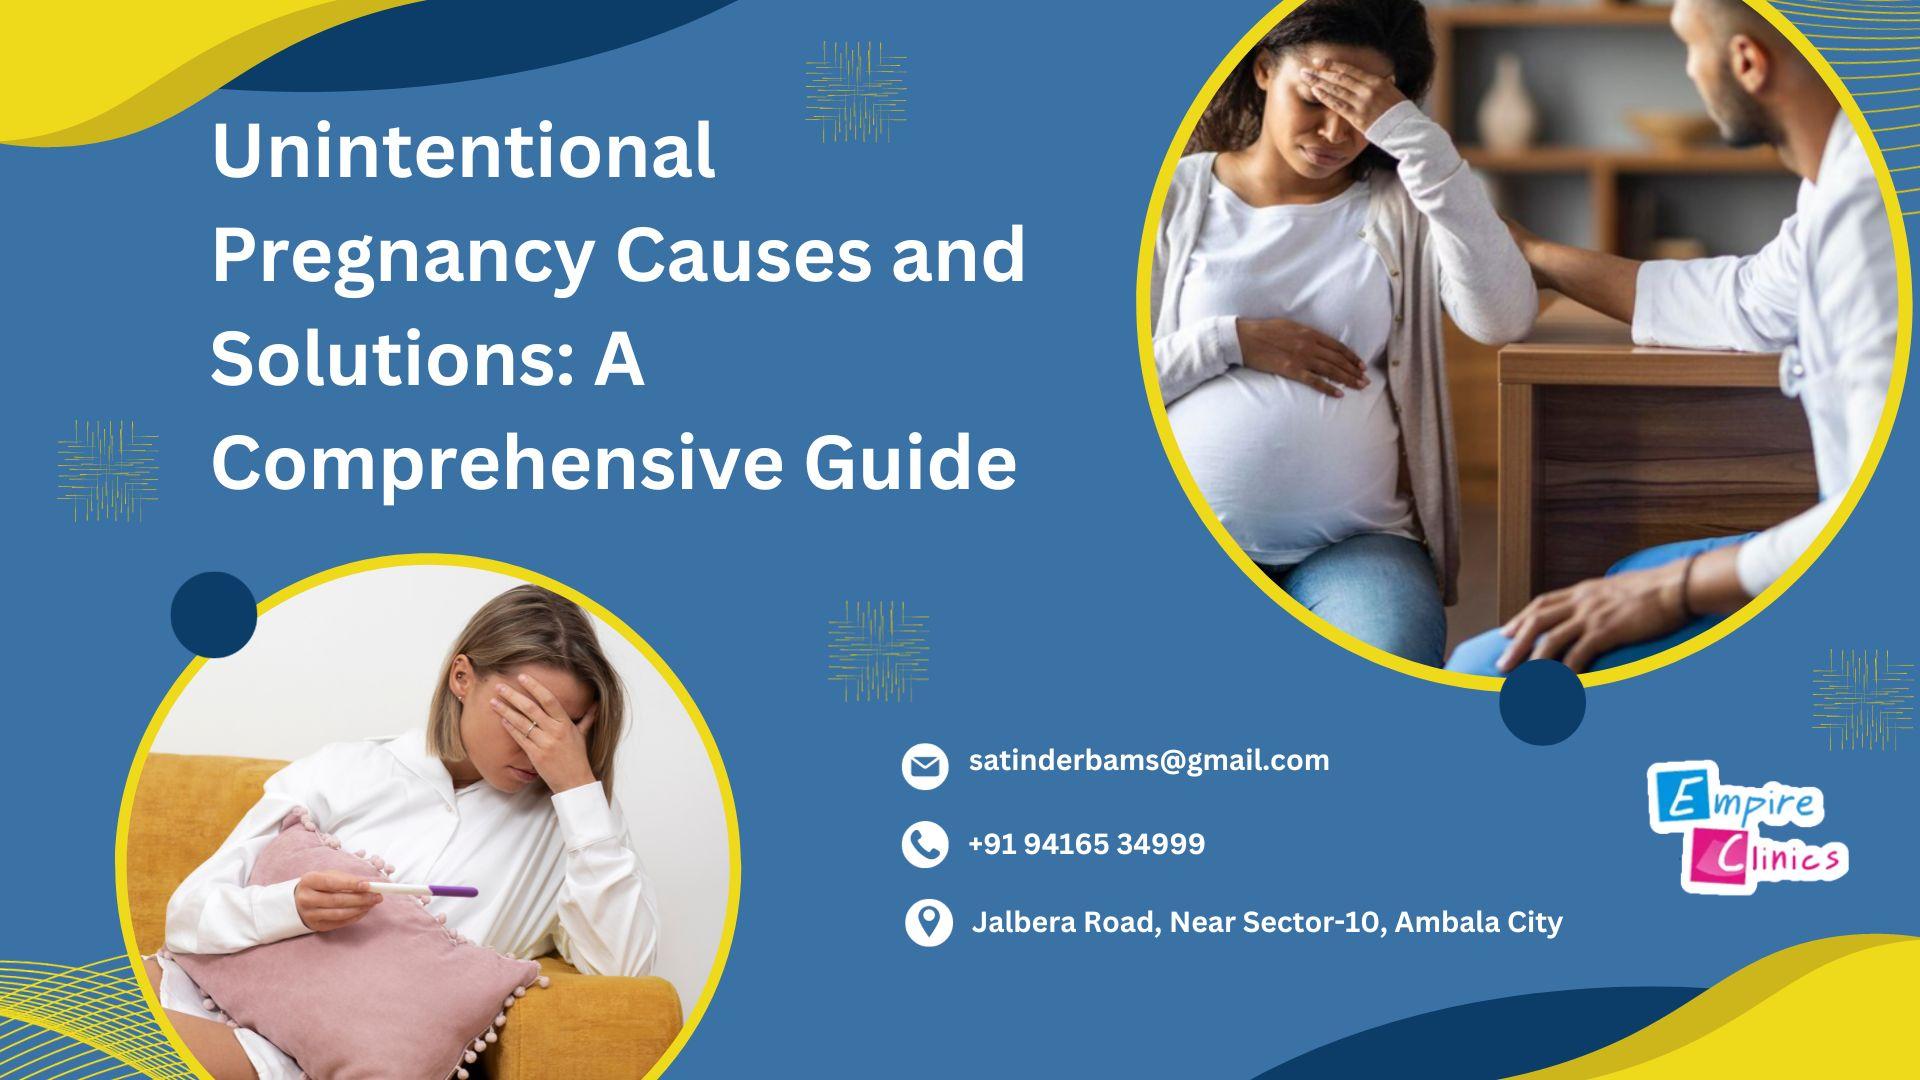 unintentional-pregnancy-causes-and-solutions-a-comprehensive-guide